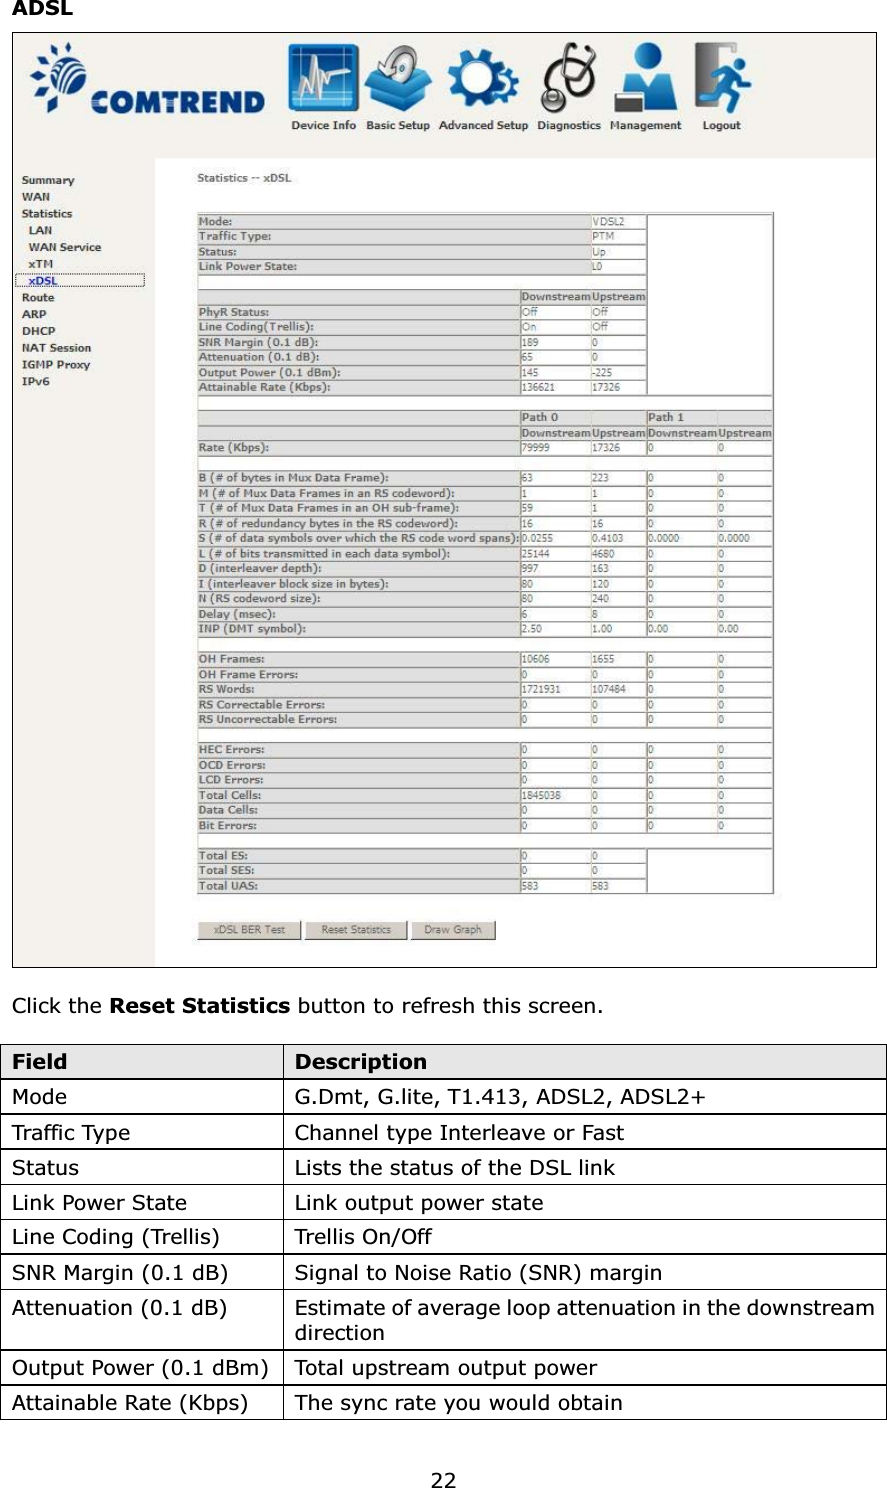 22ADSLClick the Reset Statistics button to refresh this screen.Field DescriptionMode G.Dmt, G.lite, T1.413, ADSL2, ADSL2+Traffic Type Channel type Interleave or FastStatus Lists the status of the DSL linkLink Power State Link output power stateLine Coding(Trellis) Trellis On/OffSNR Margin (0.1 dB) Signal to Noise Ratio (SNR) marginAttenuation (0.1 dB) Estimate of average loop attenuation in the downstreamdirectionOutput Power (0.1 dBm) Total upstream output powerAttainable Rate (Kbps) The sync rate you would obtain